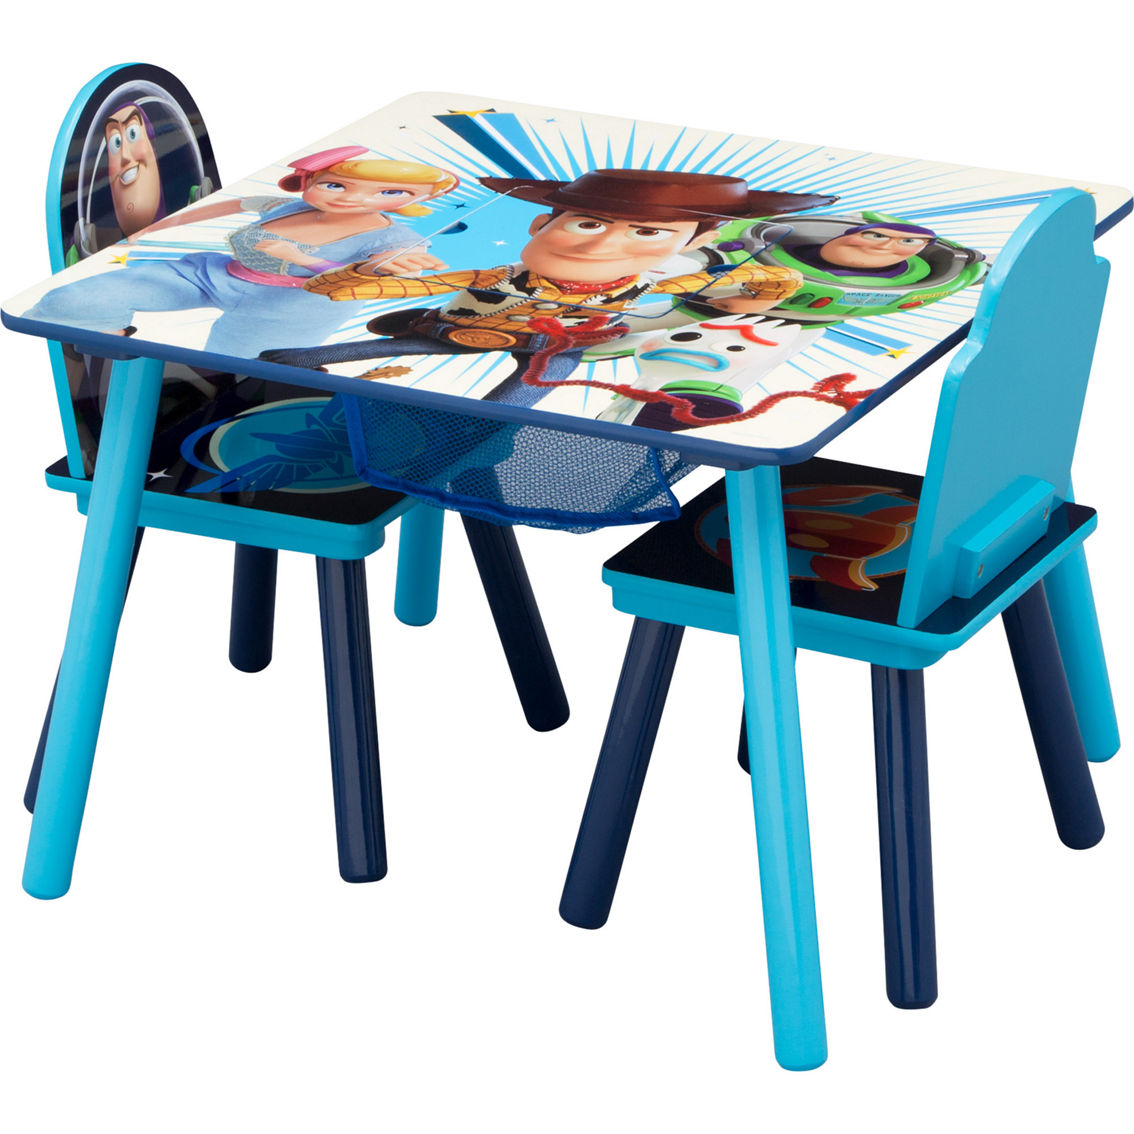 Delta Children Toy Story 4 Table and Chair Set with Storage - Image 3 of 5